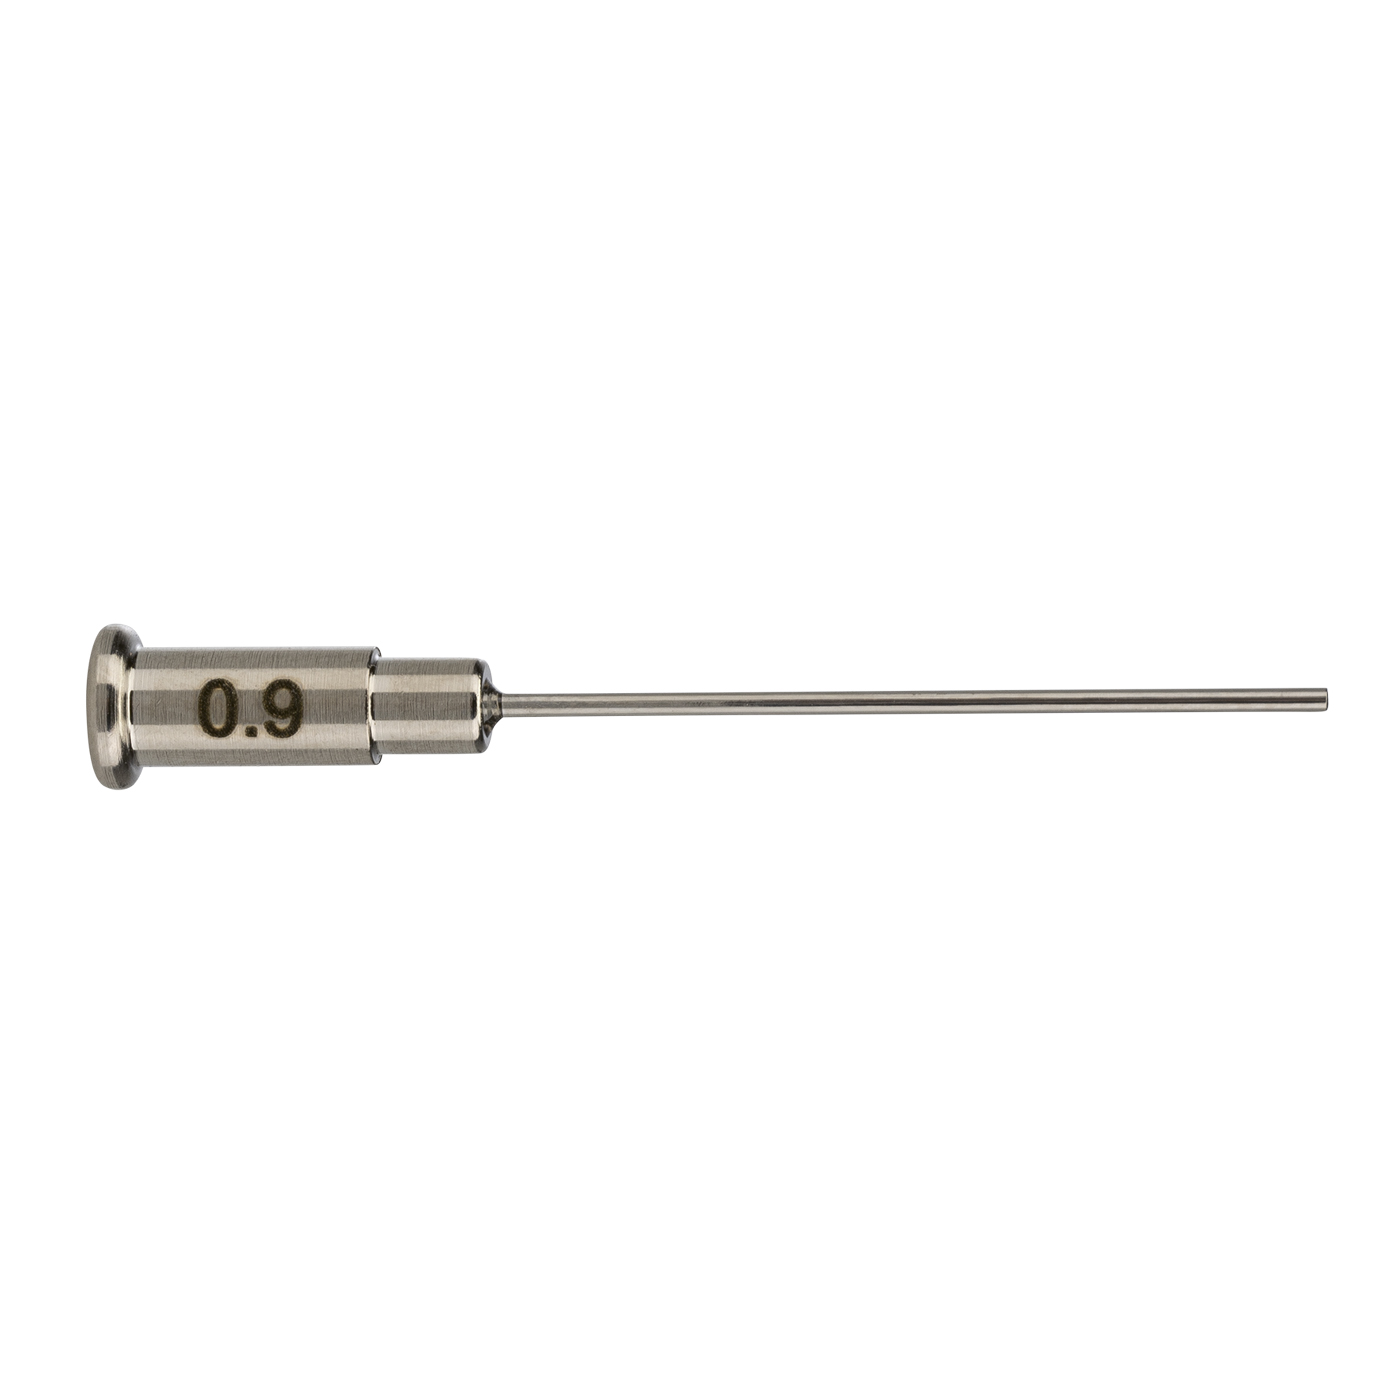 Replacement Cannula, 0.9 mm/0.25 kW - 1 piece